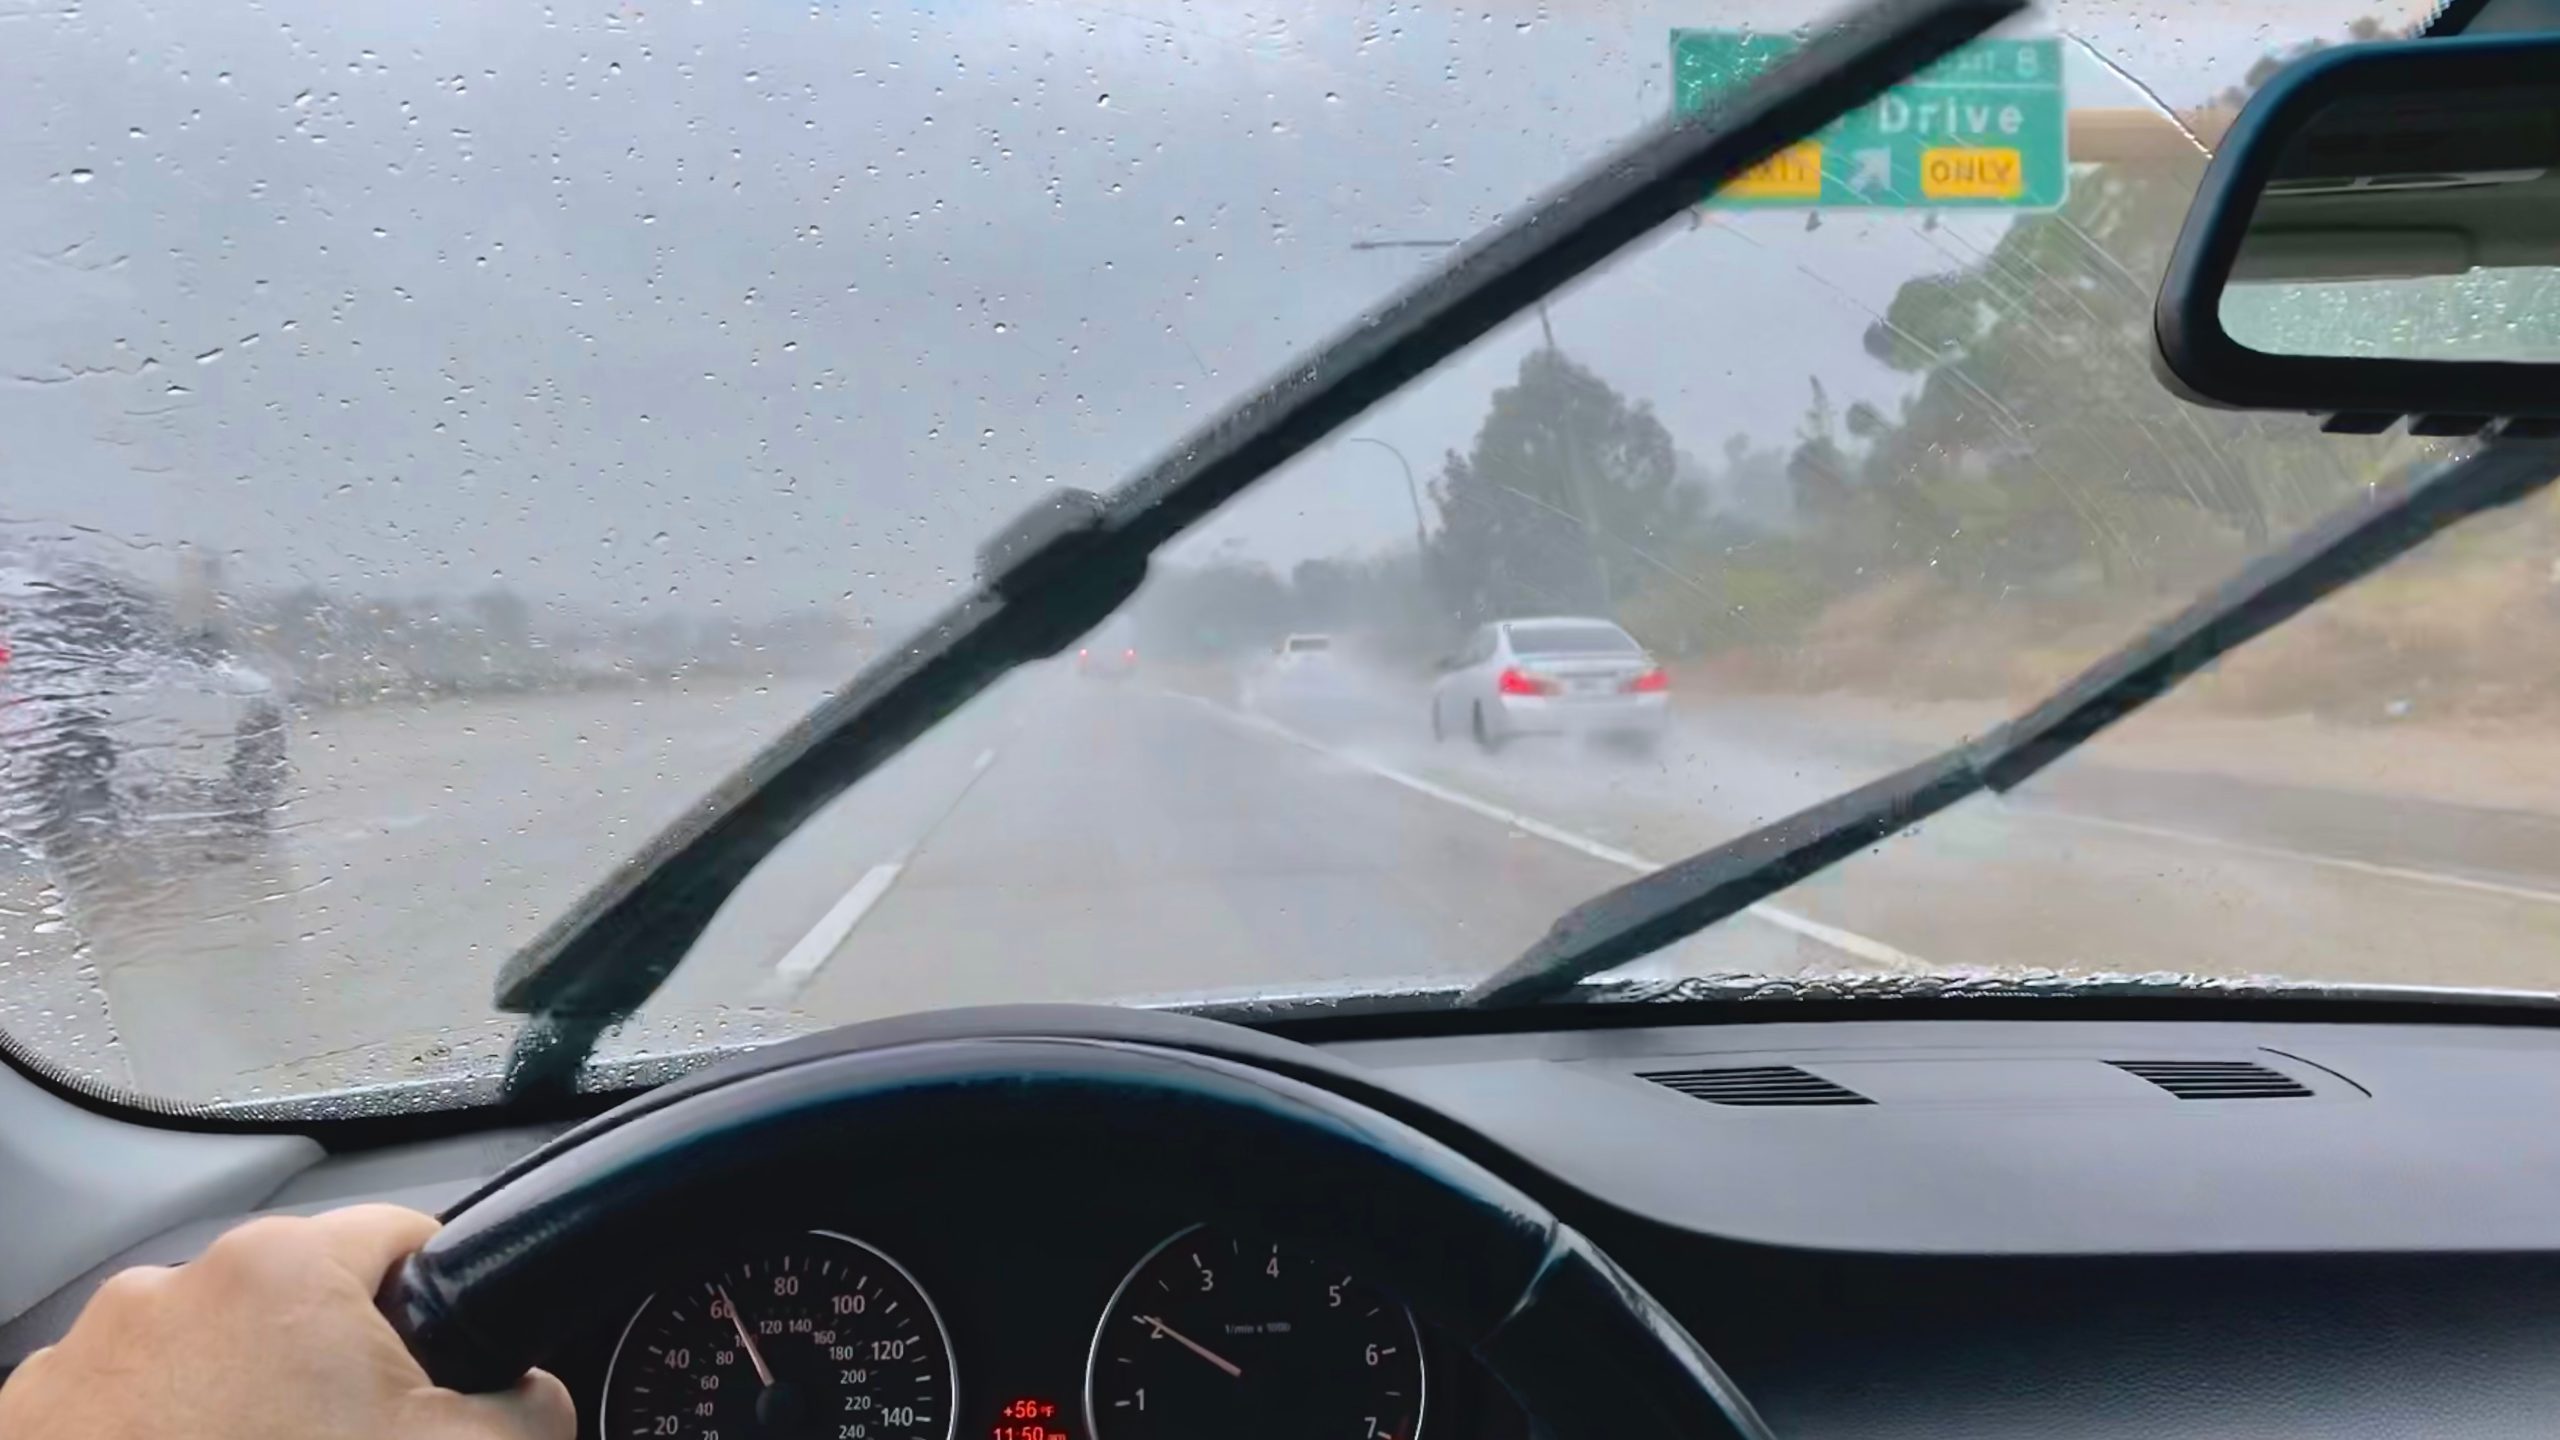 https://autolab.com.co/wp-content/uploads/driving-in-the-car-in-the-rain-with-the-windshield-2023-11-27-05-22-40-utc-scaled.jpg